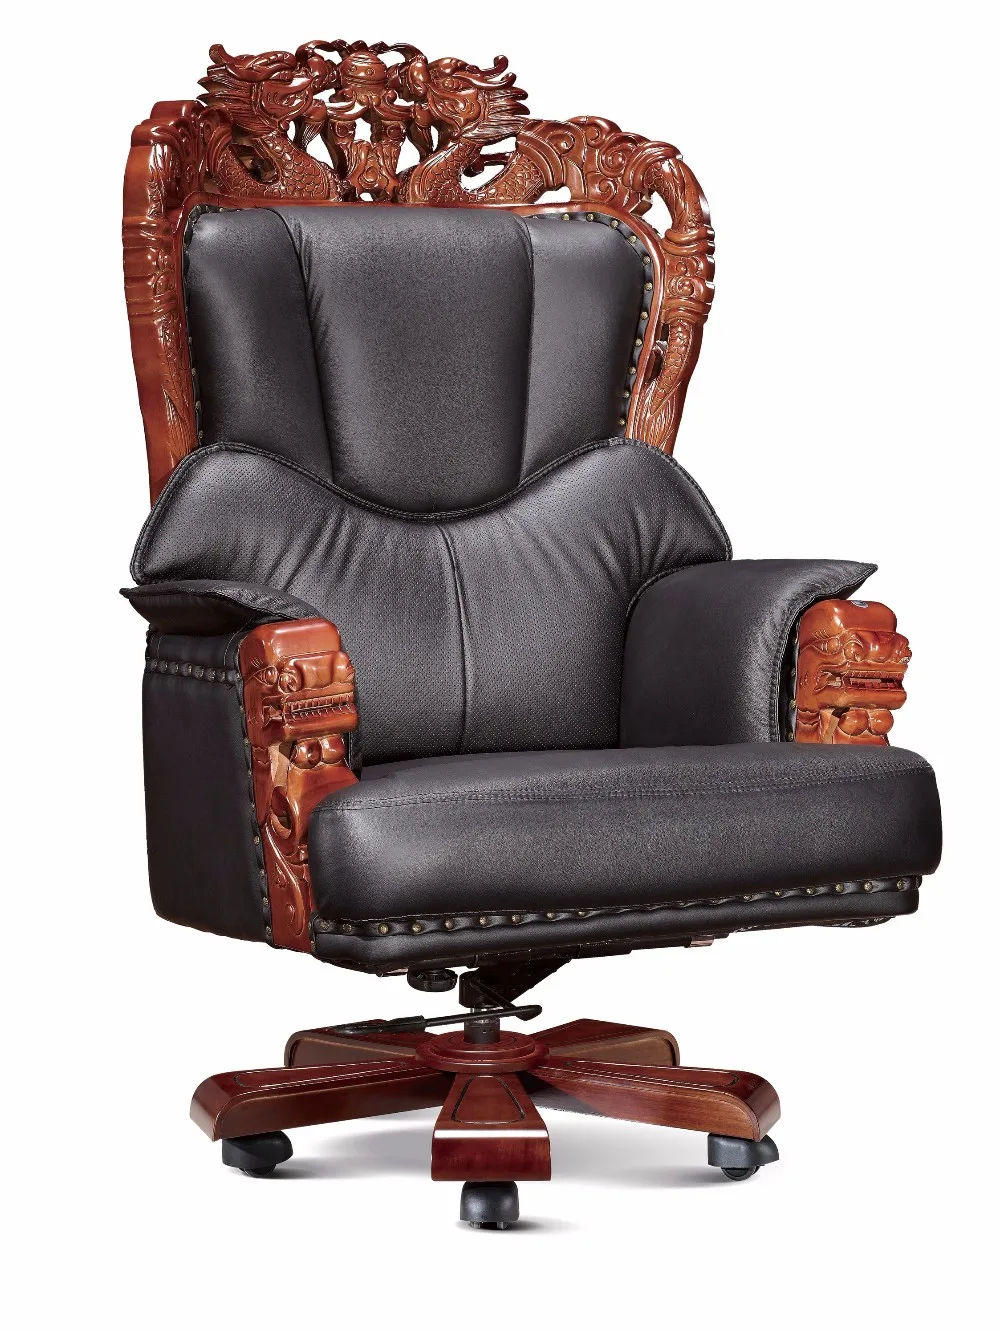 Europe Style Office Executive Chair King Throne Chair Buy King Throne Chair Luxury Executive Office Chairs Europe Style Office Executive Chair Product On Alibaba Com